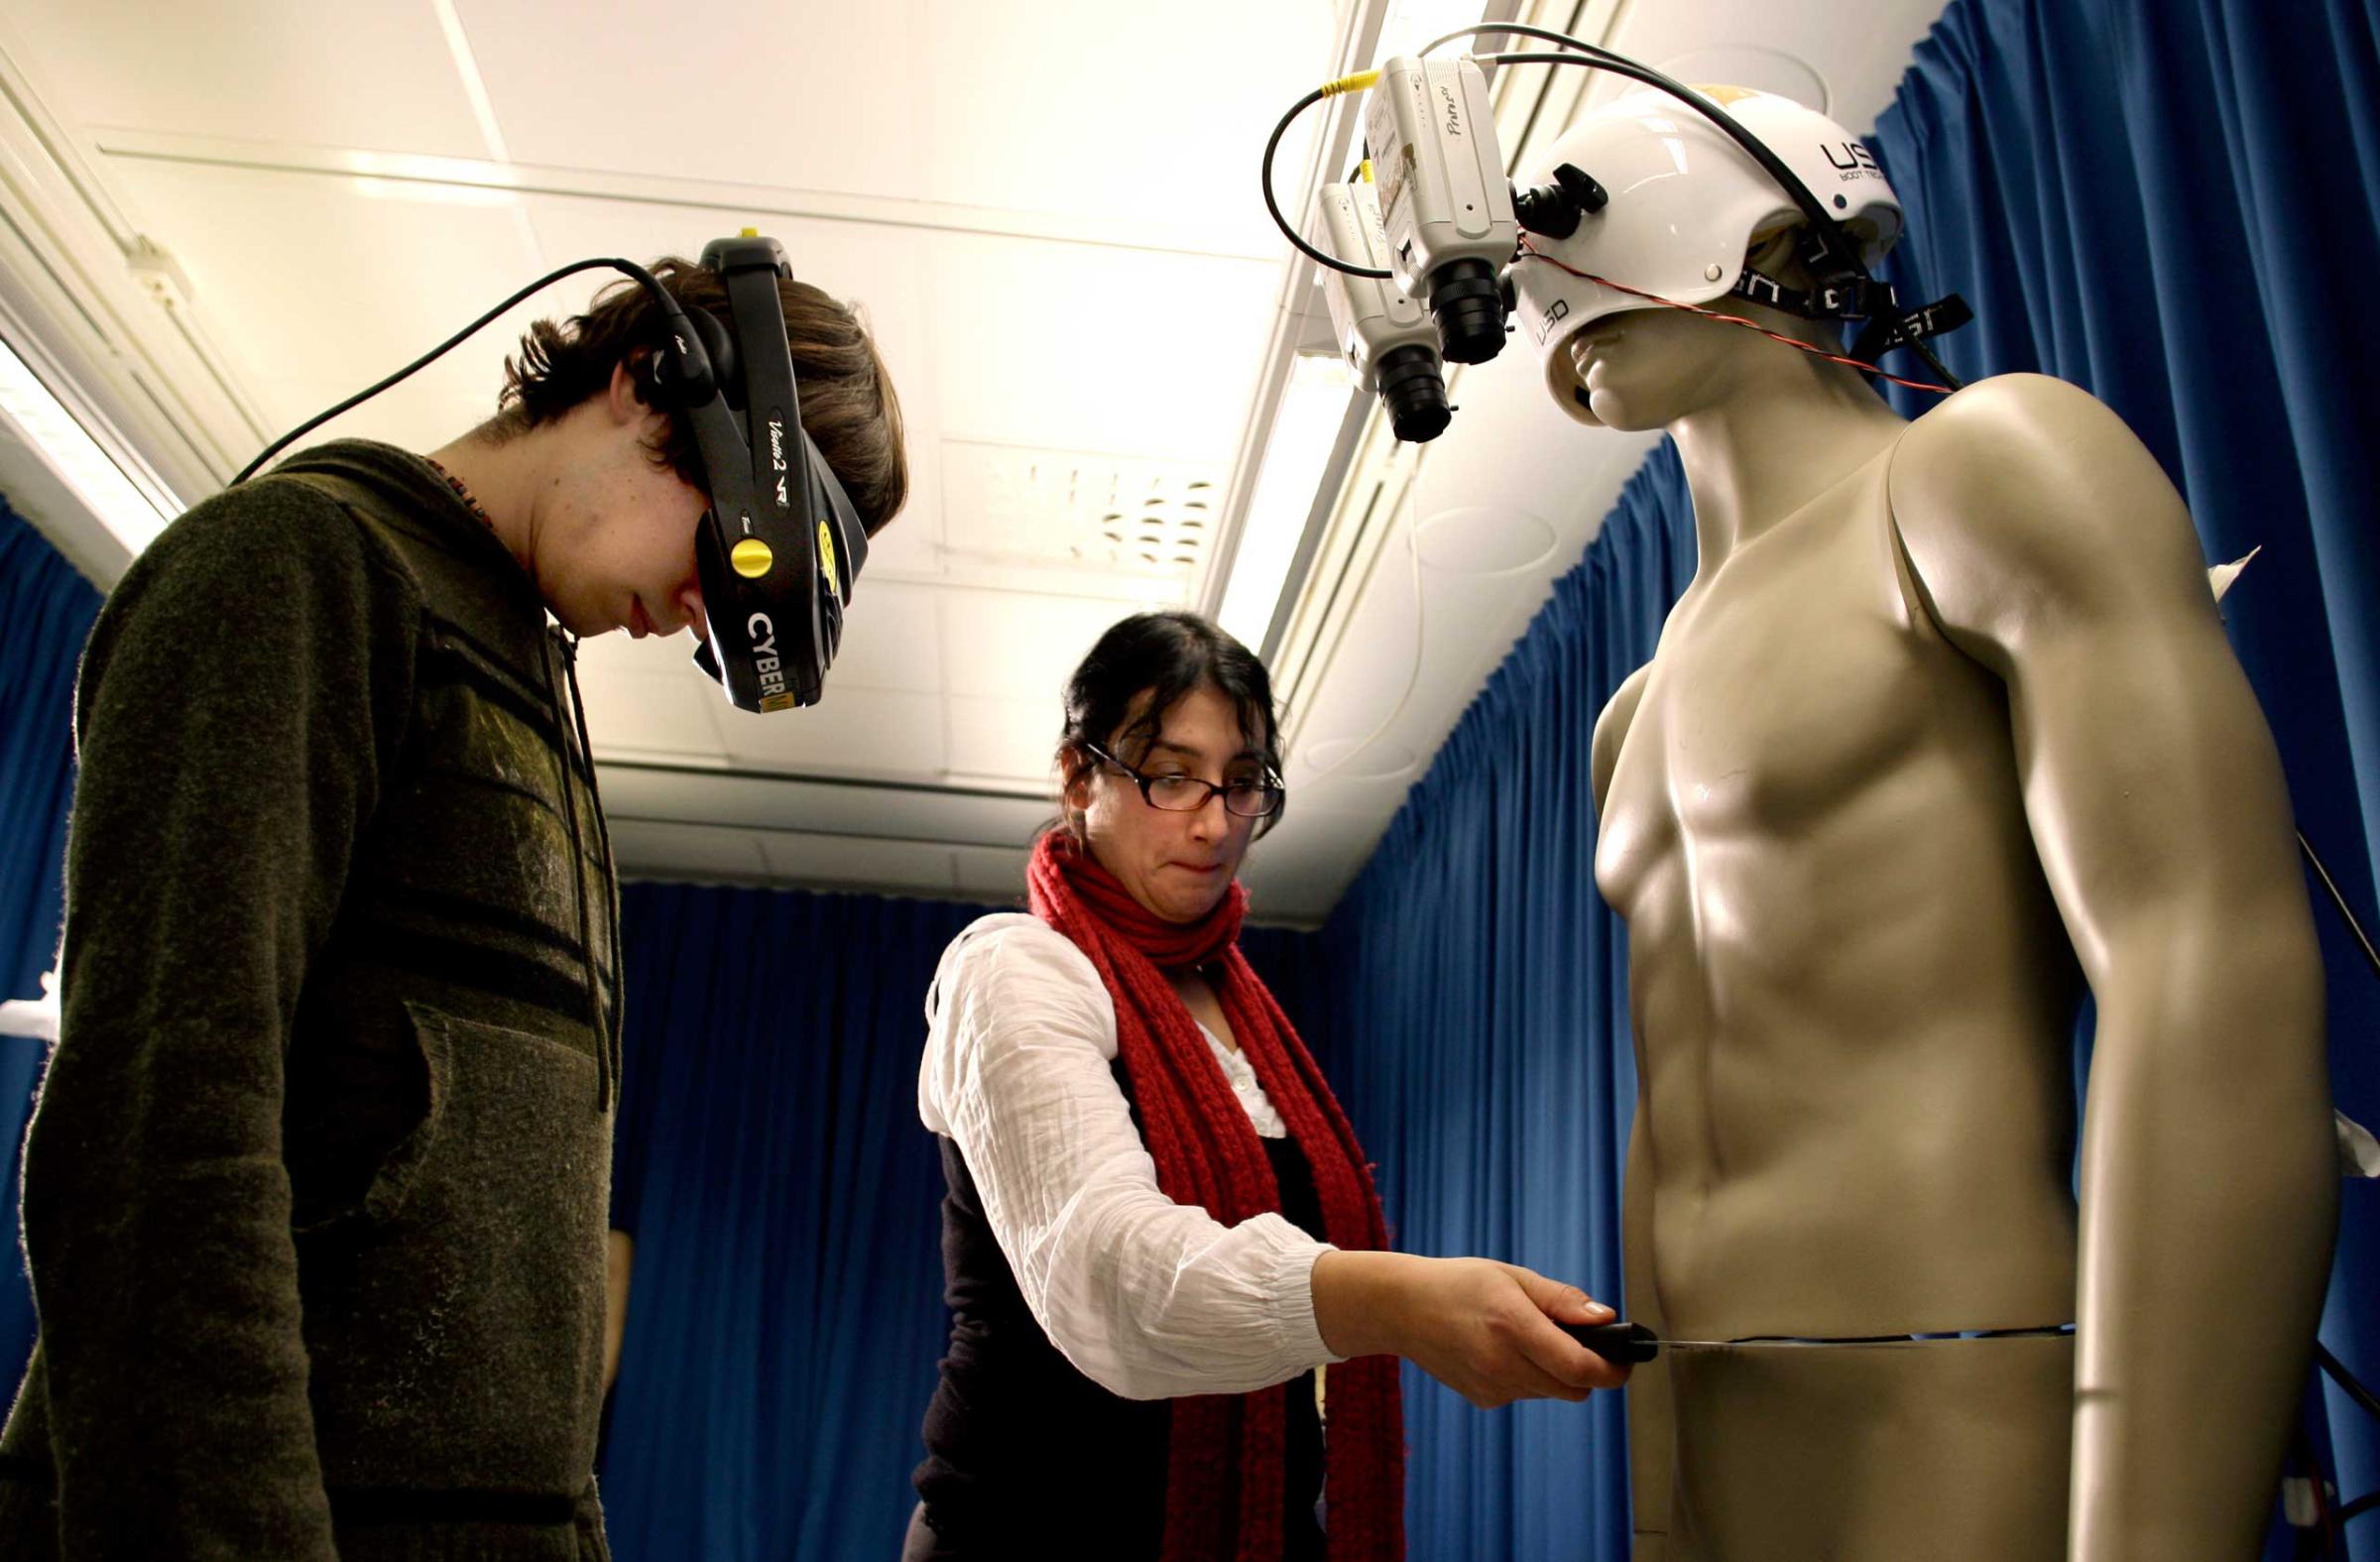 Valeria Petkova, right, and student Andrew Ketterer, left, of the Karolinska Institute in Stockholm, tested the 'body-swap' illusion, a method whereby people can experience the illusion that either a mannequin or another person's body is their own body.